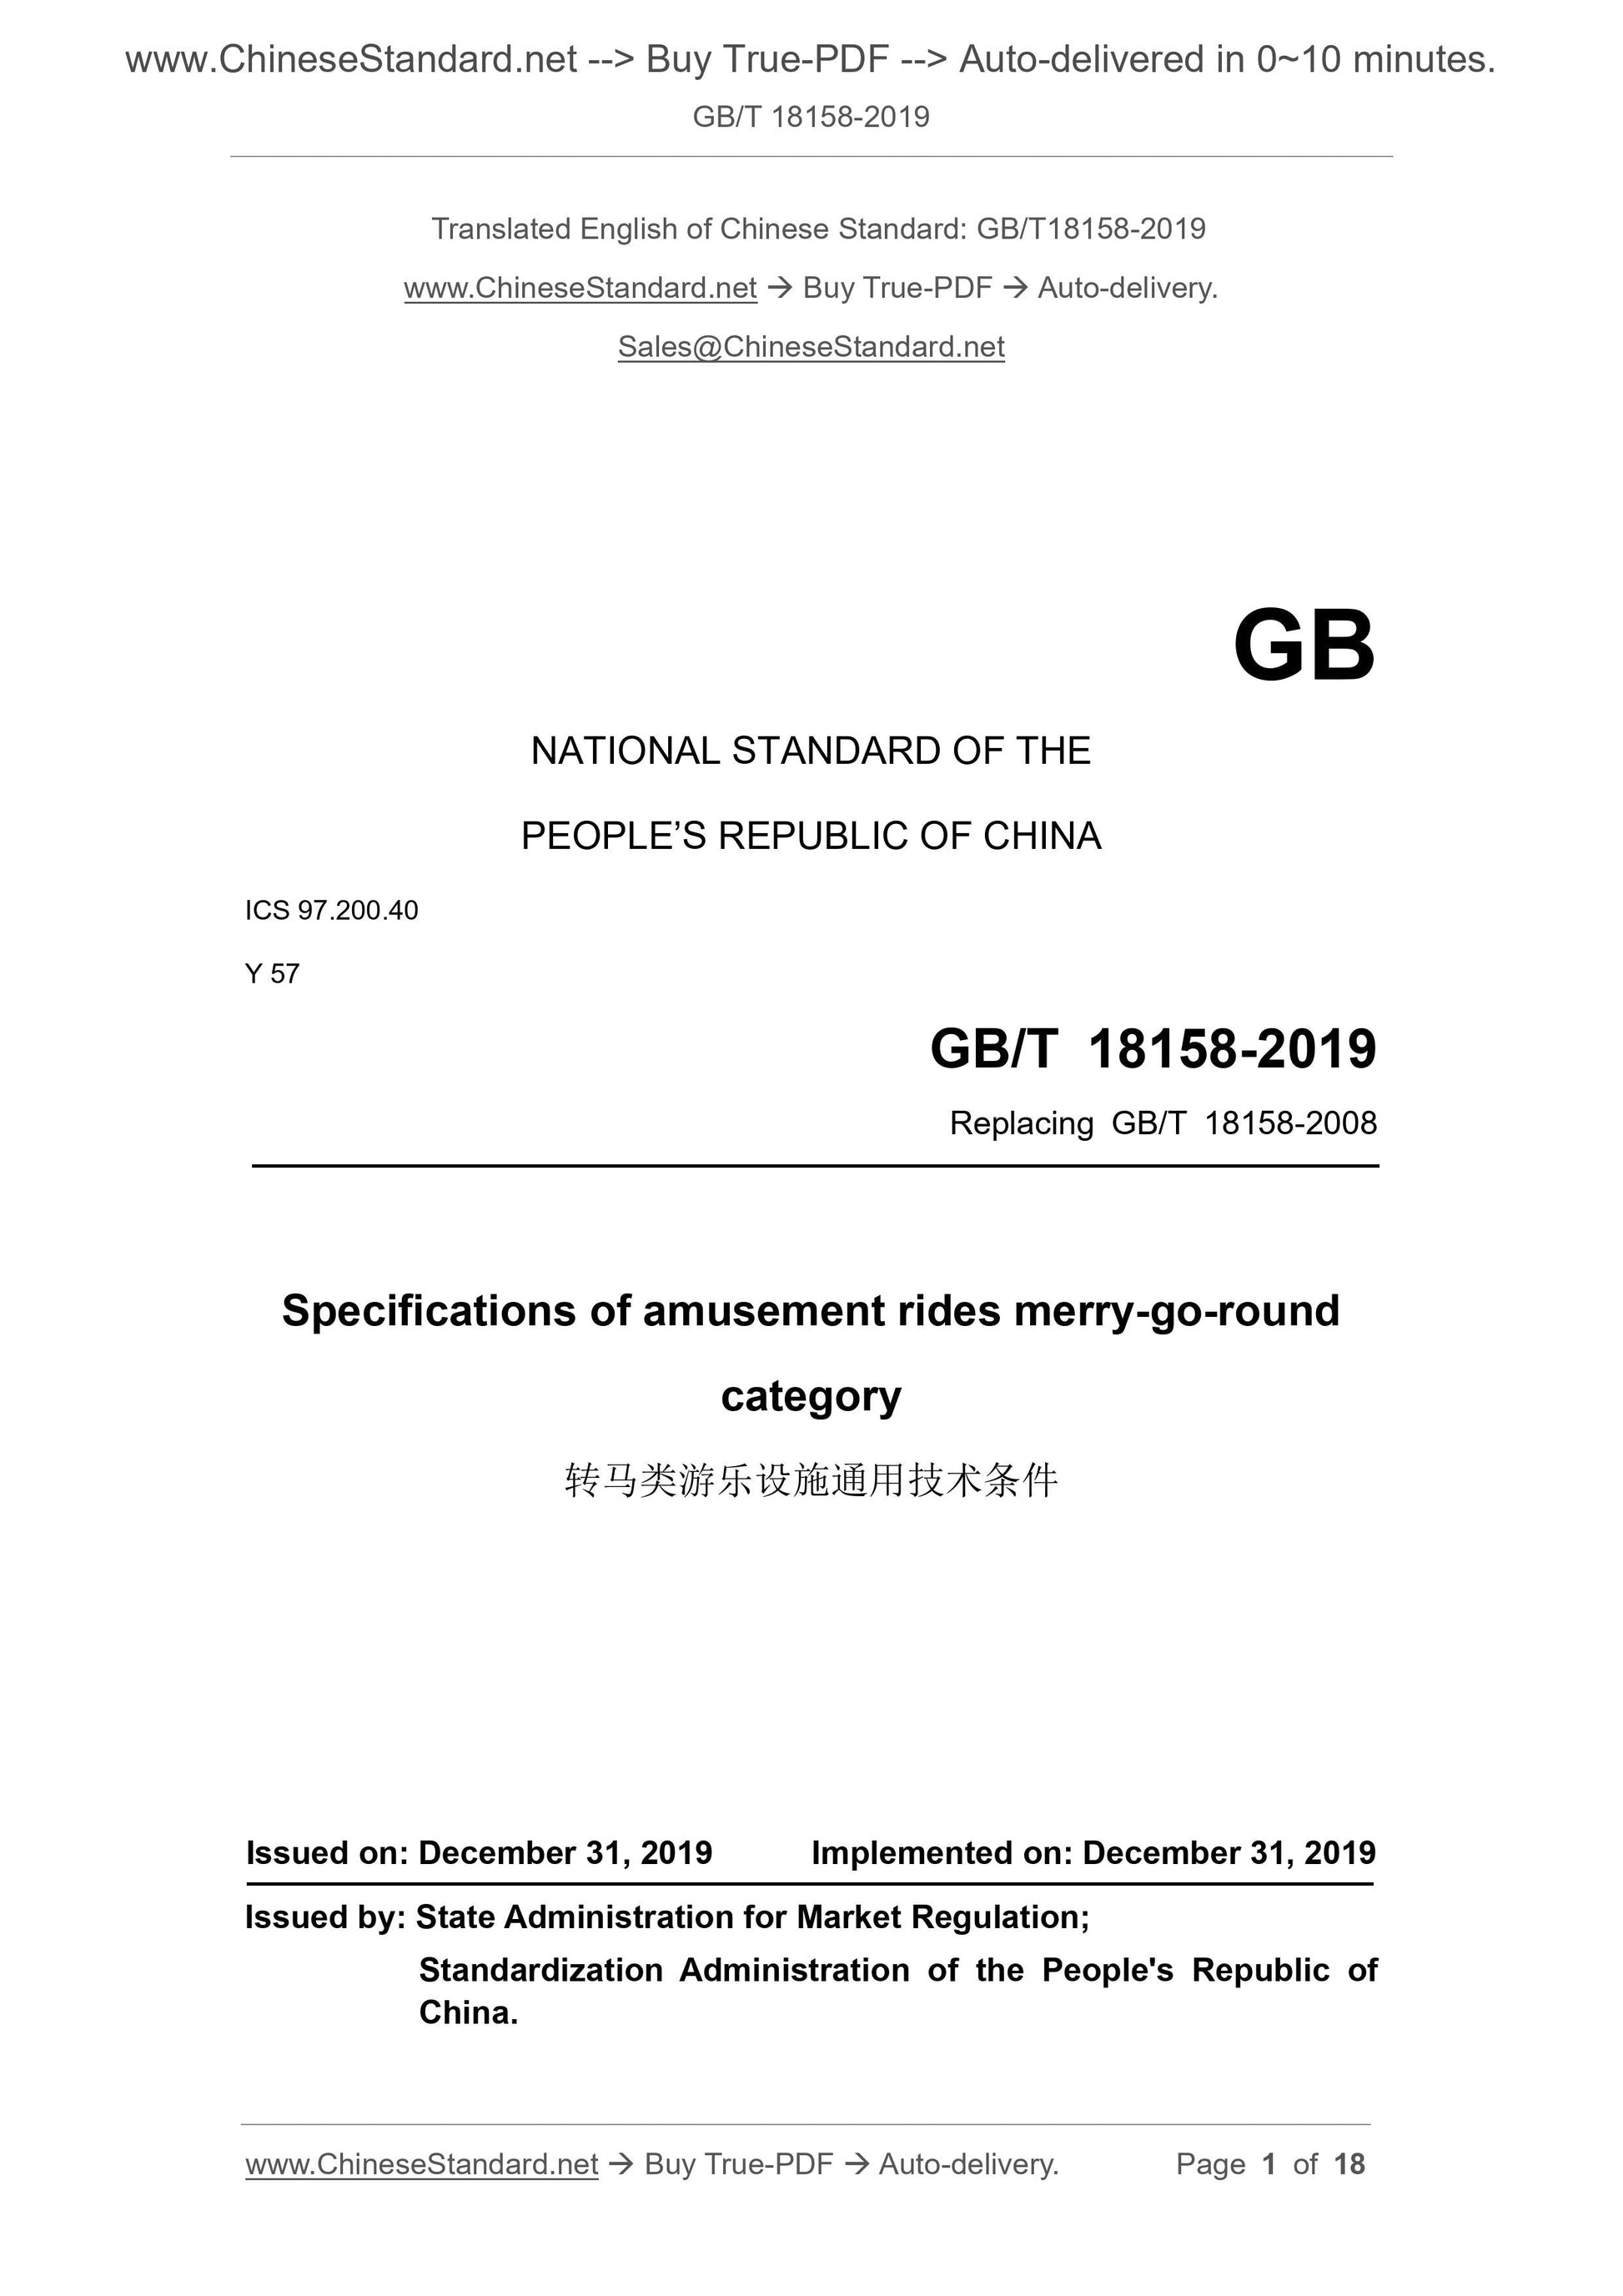 GB/T 18158-2019 Page 1